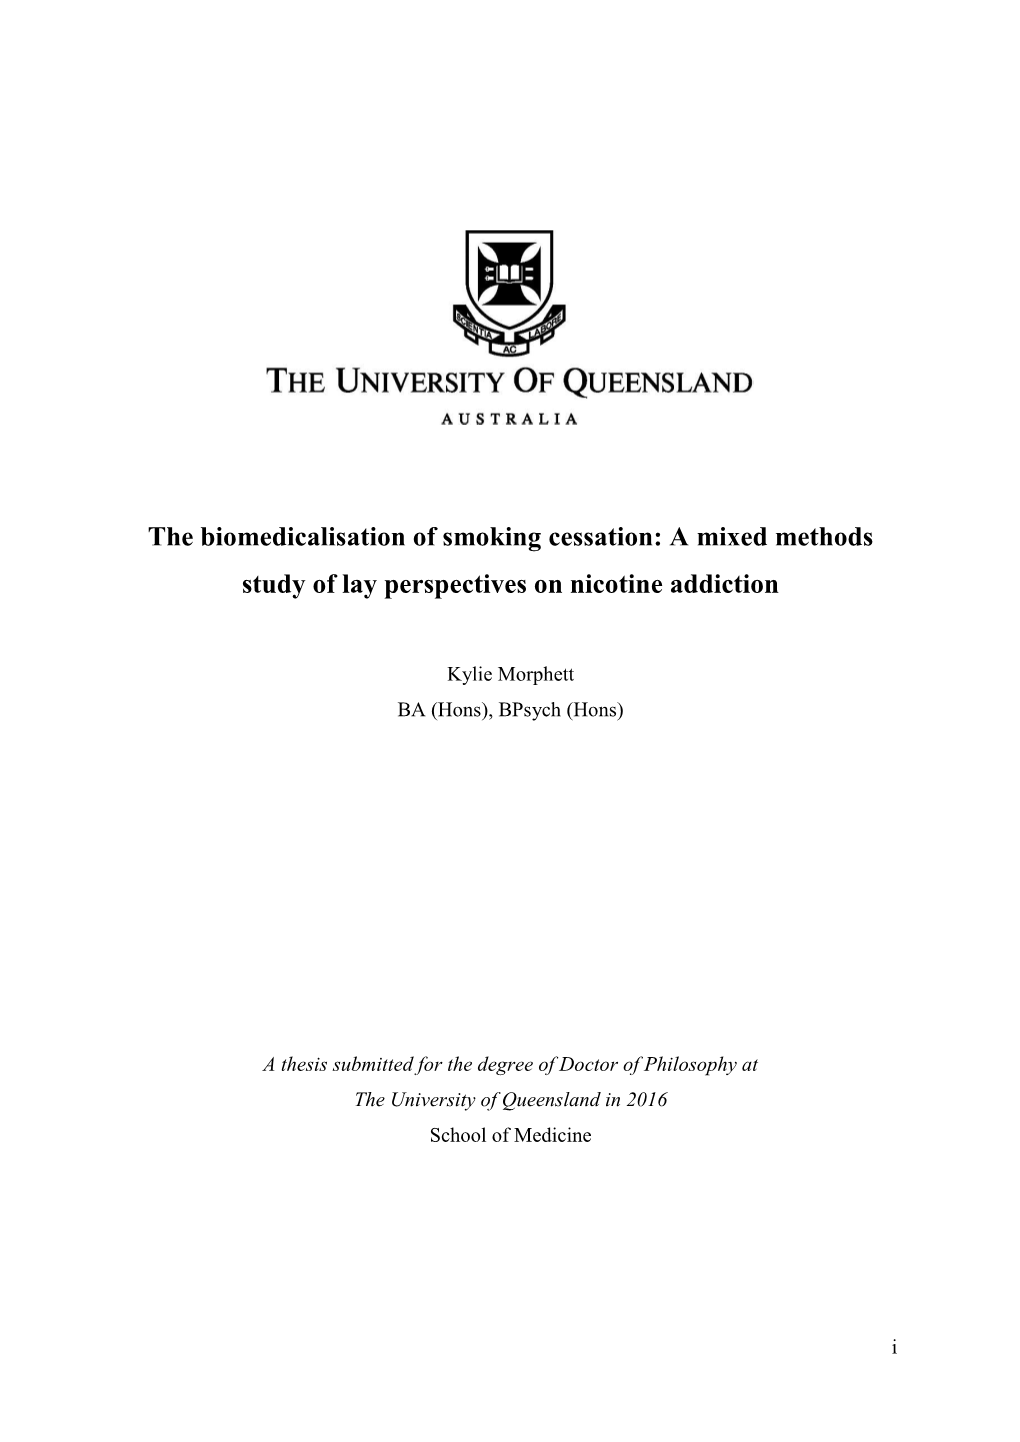 The Biomedicalisation of Smoking Cessation: a Mixed Methods Study of Lay Perspectives on Nicotine Addiction